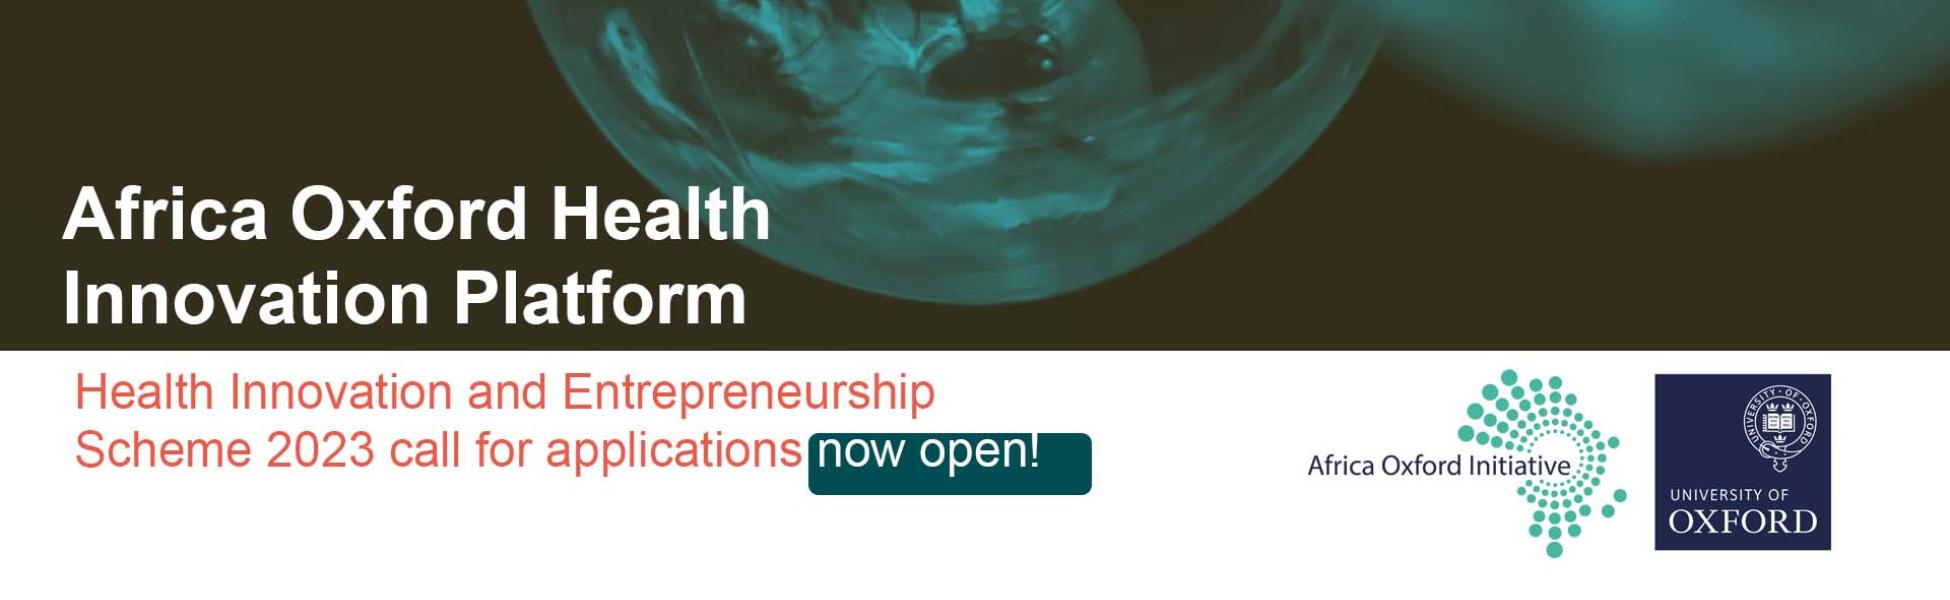 an image with text 'Health Innovation and Entrepreneurship scheme 2023 call for applications now open